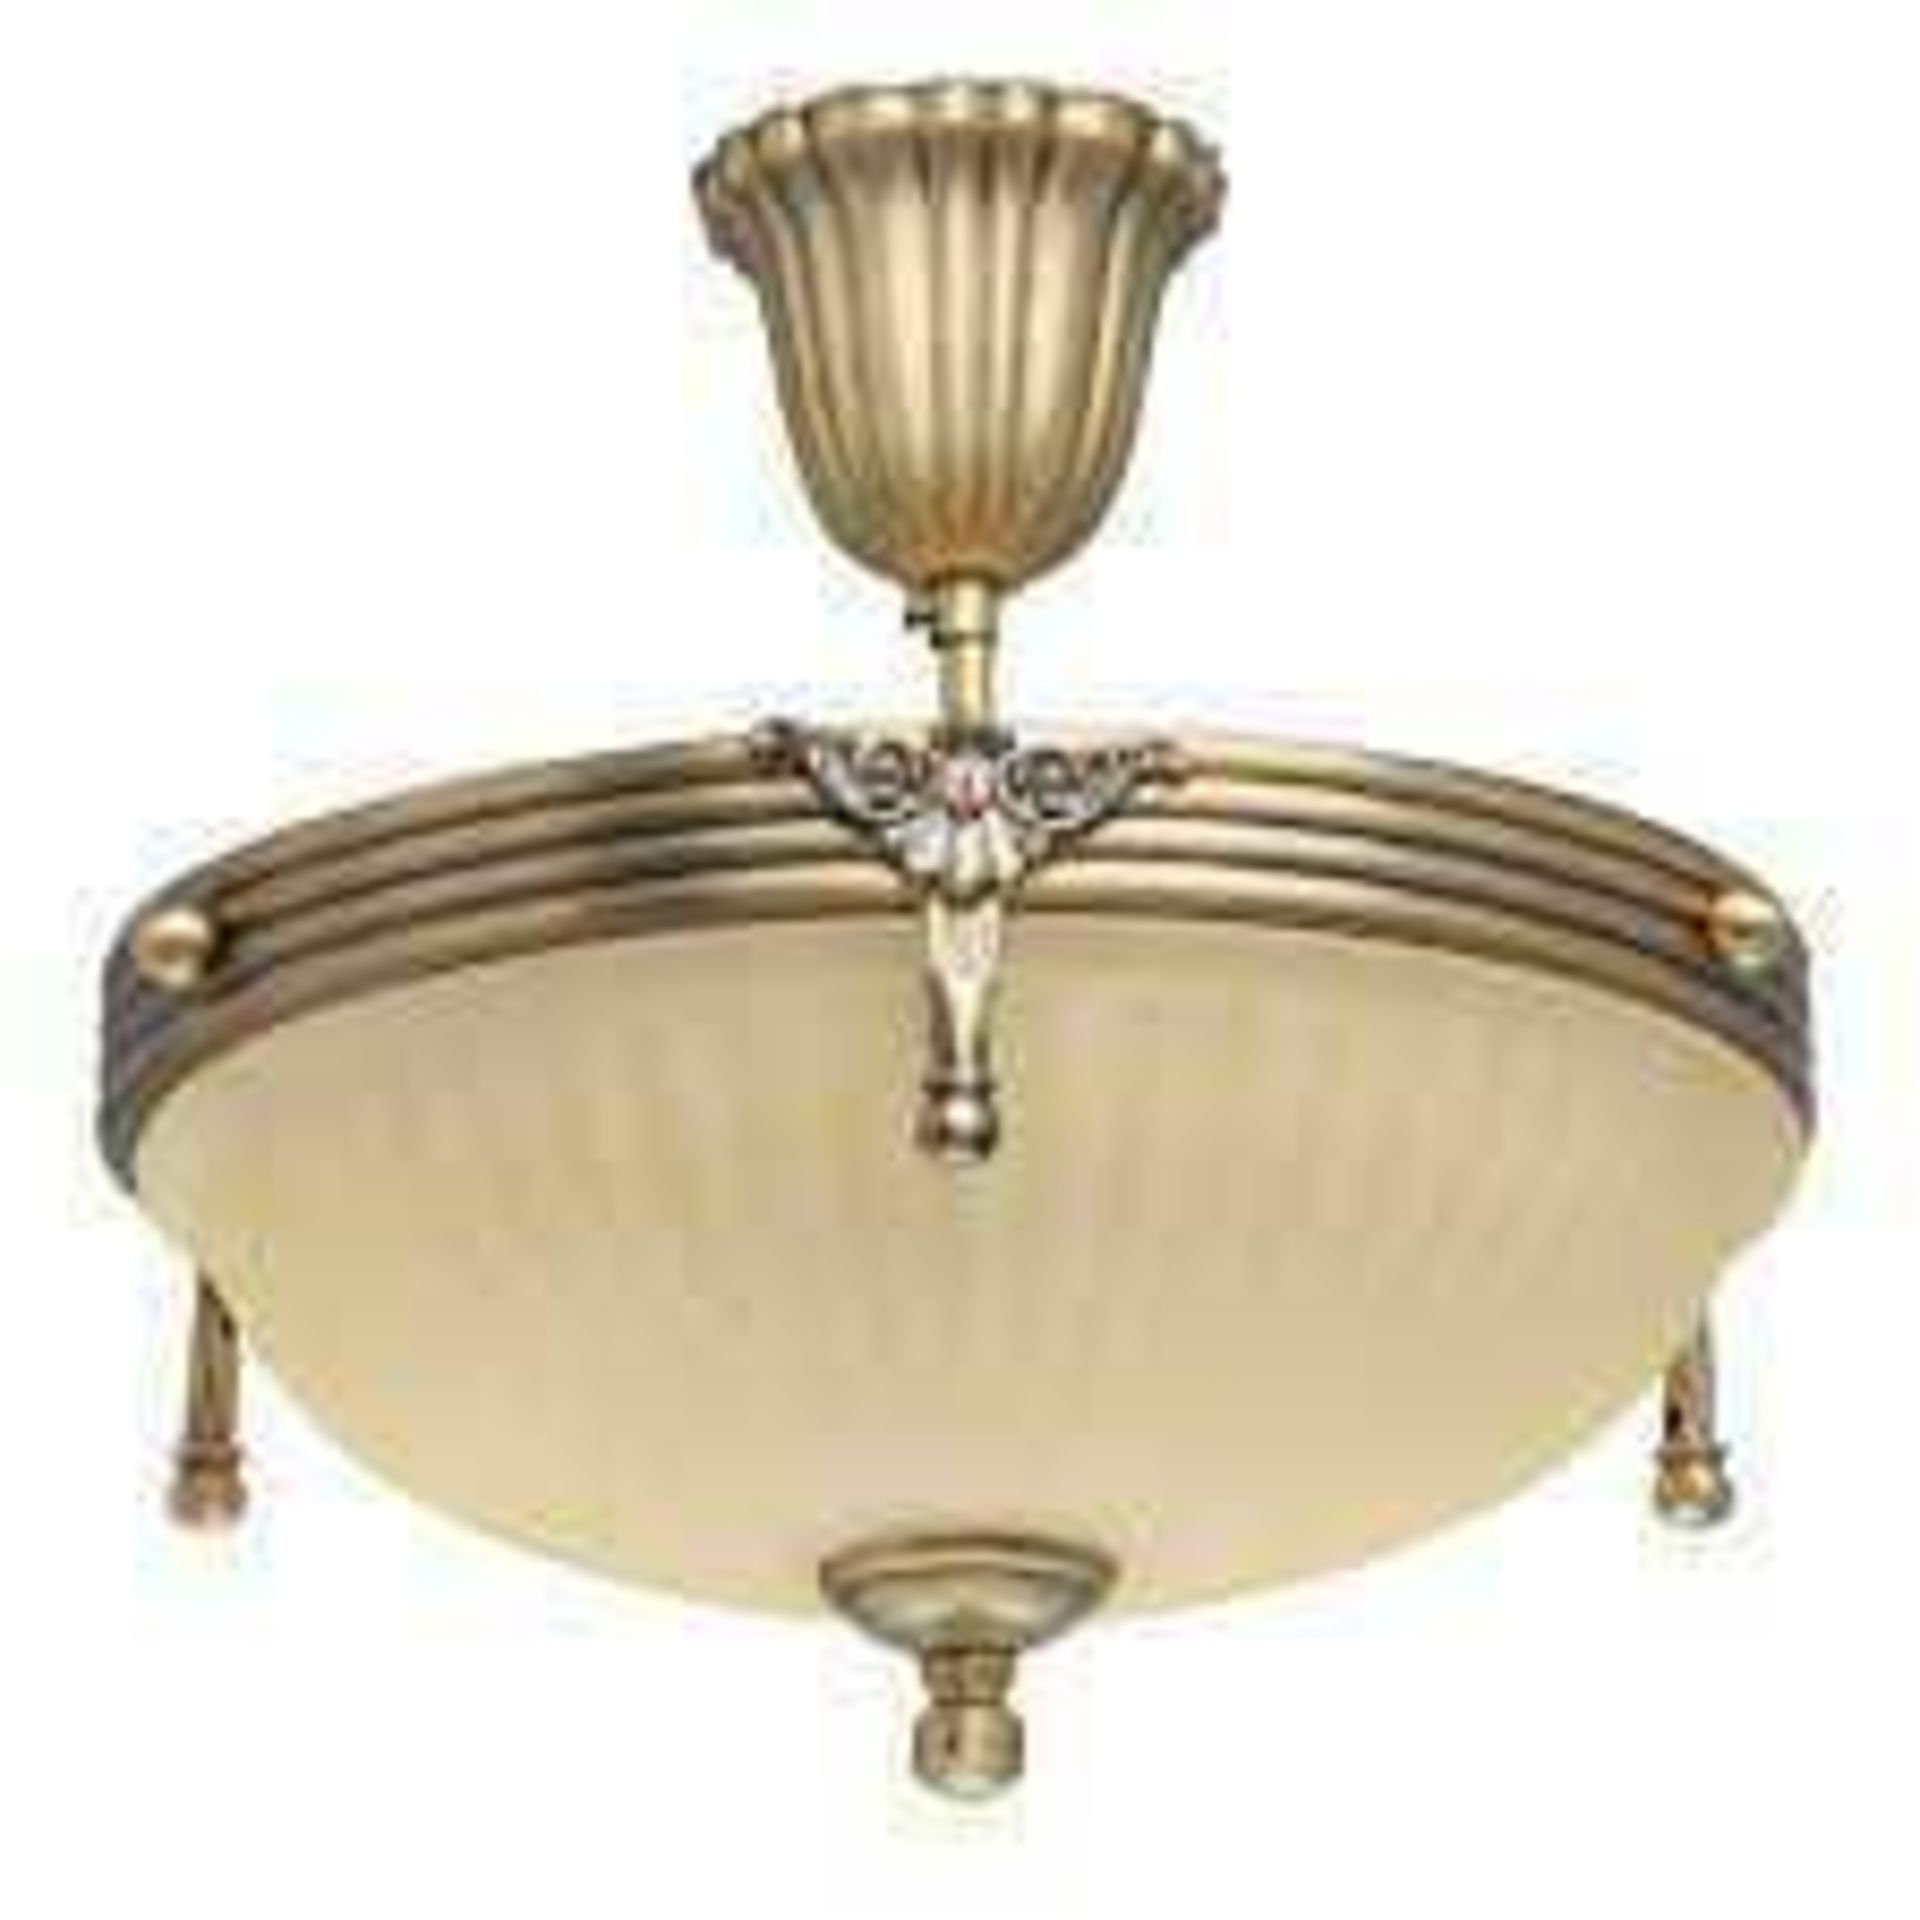 RRP £180 Lot To Contain 1 × Wayfair Ceiling Fixture Light With A Beautifully Styled Art Deco Look Of